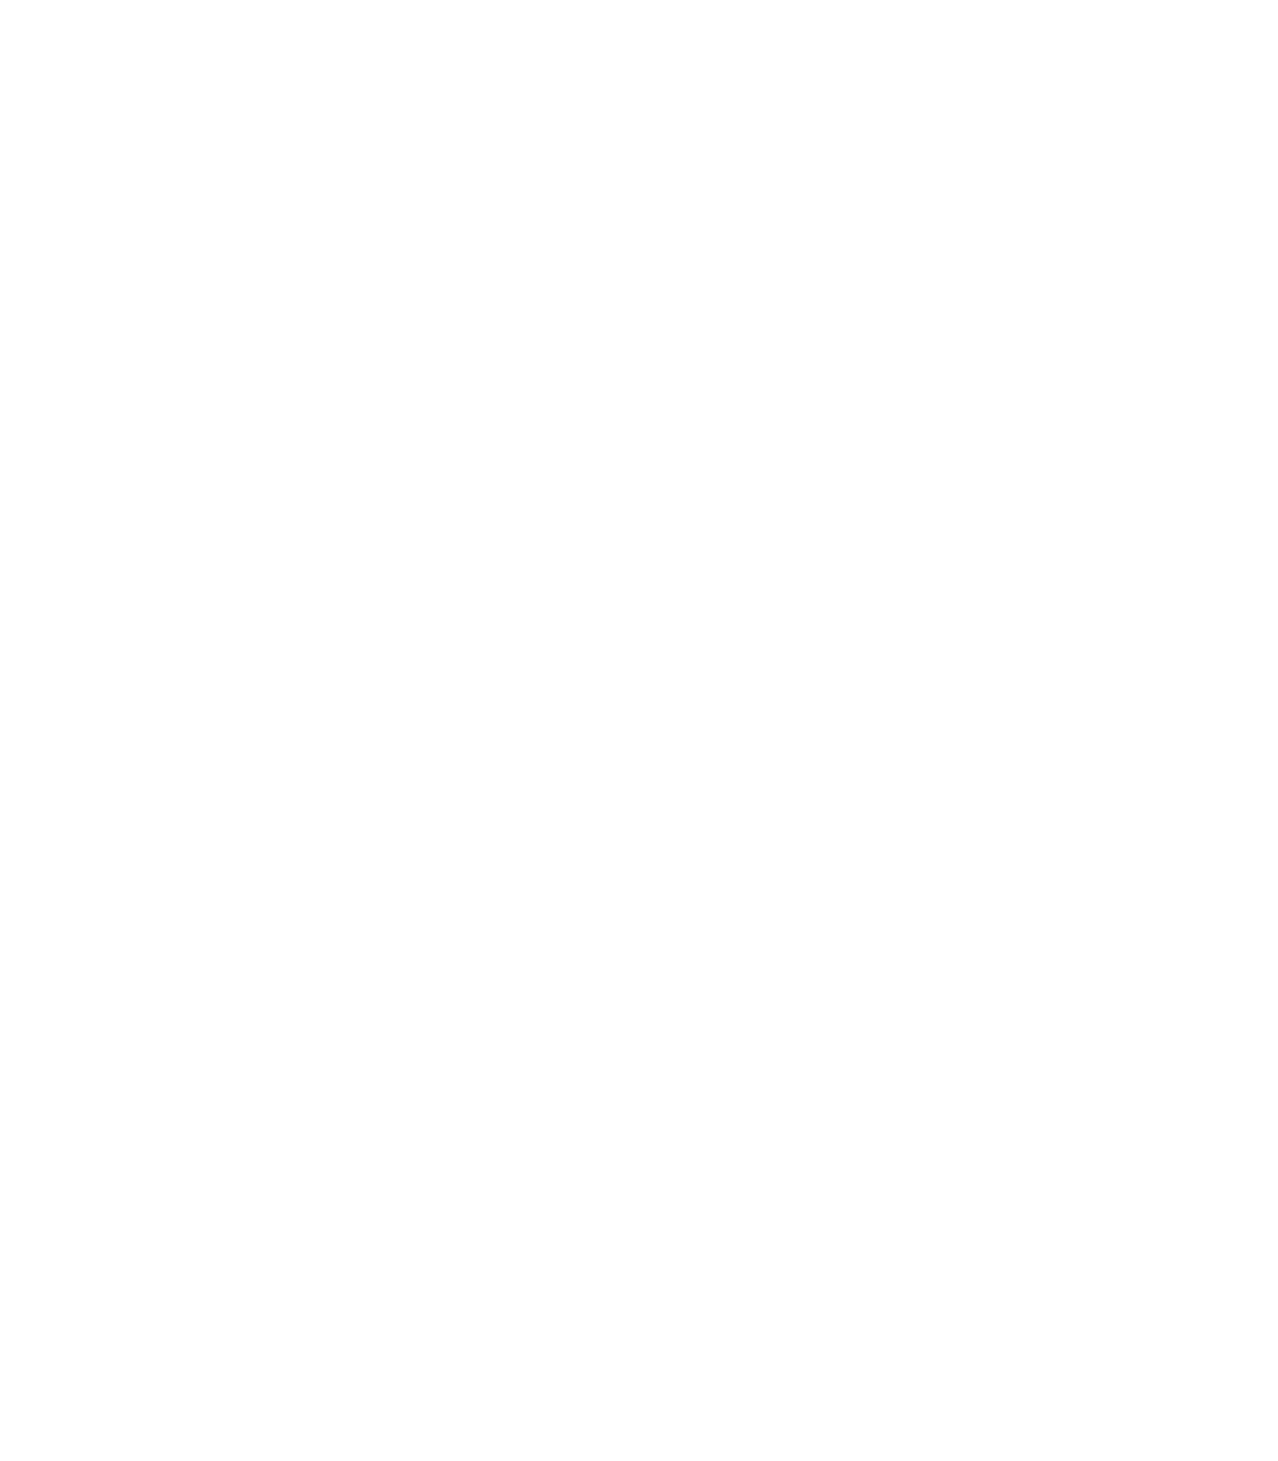 Hydraulic Pictures